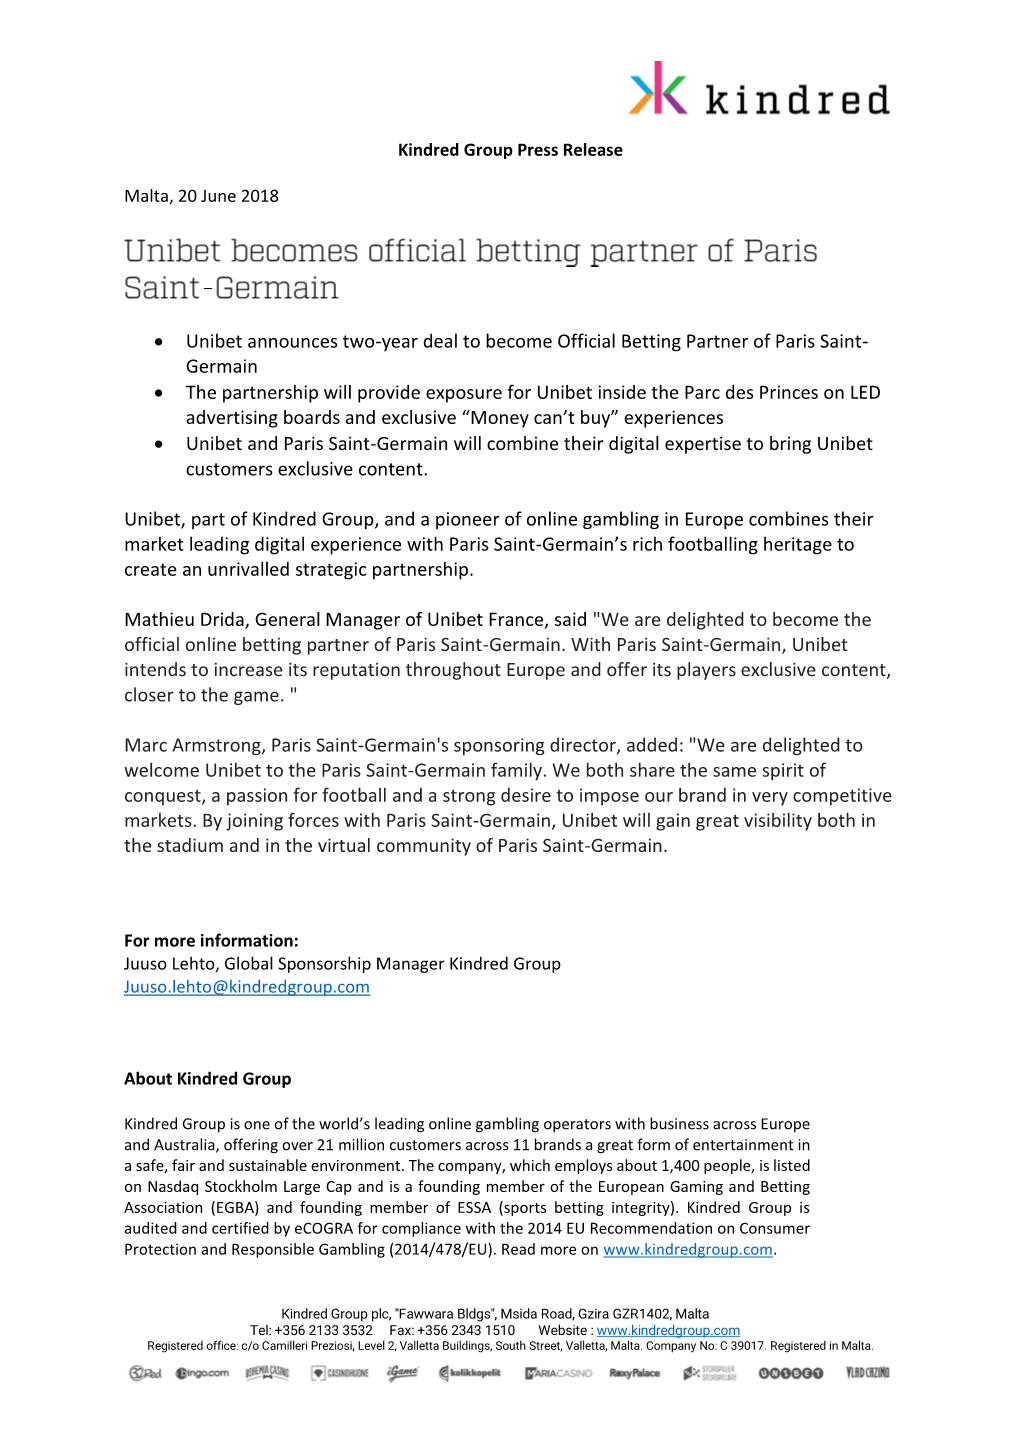 Unibet Announces Two-Year Deal to Become Official Betting